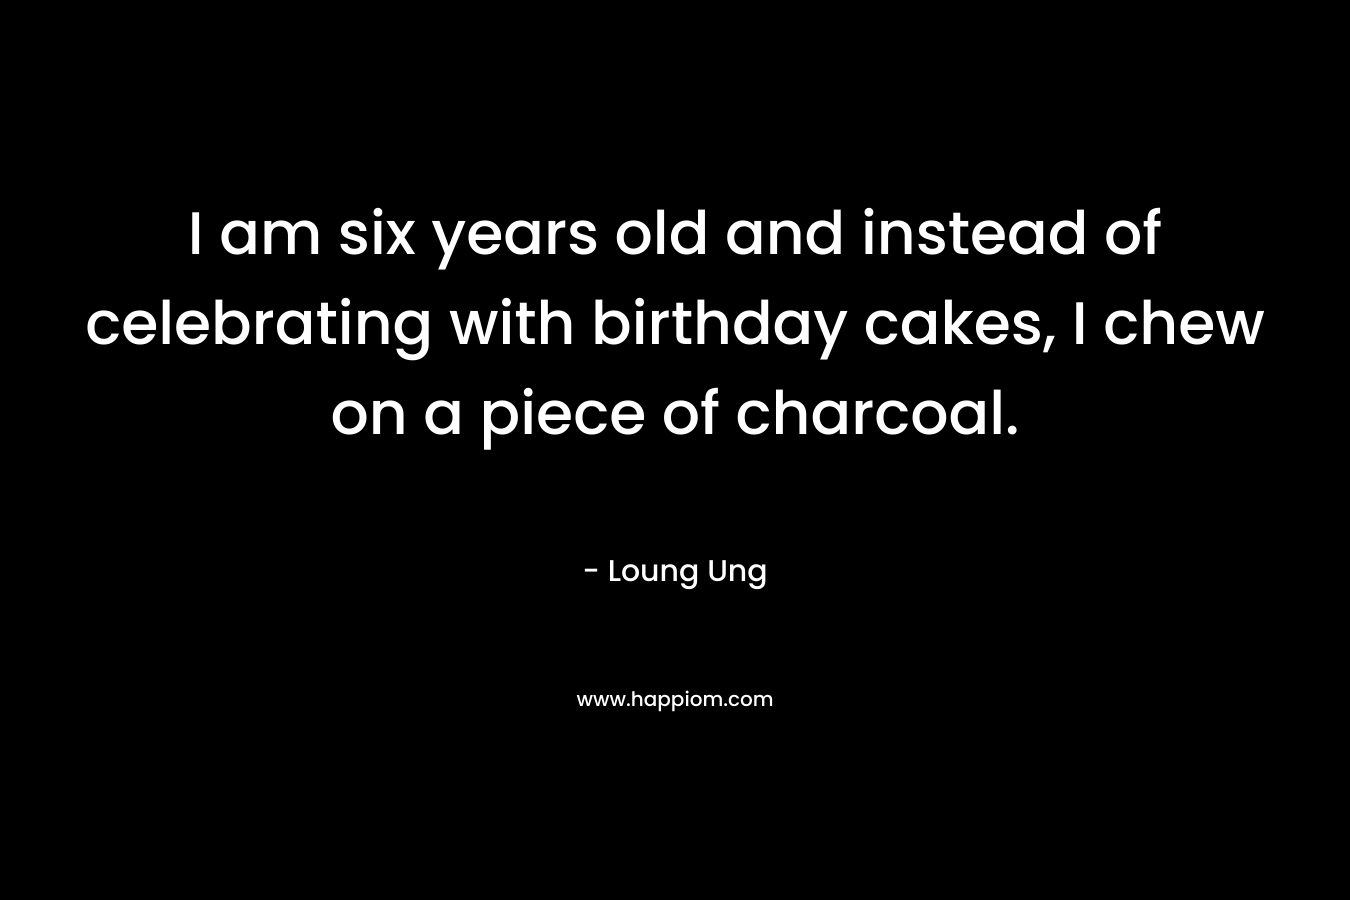 I am six years old and instead of celebrating with birthday cakes, I chew on a piece of charcoal.  – Loung Ung